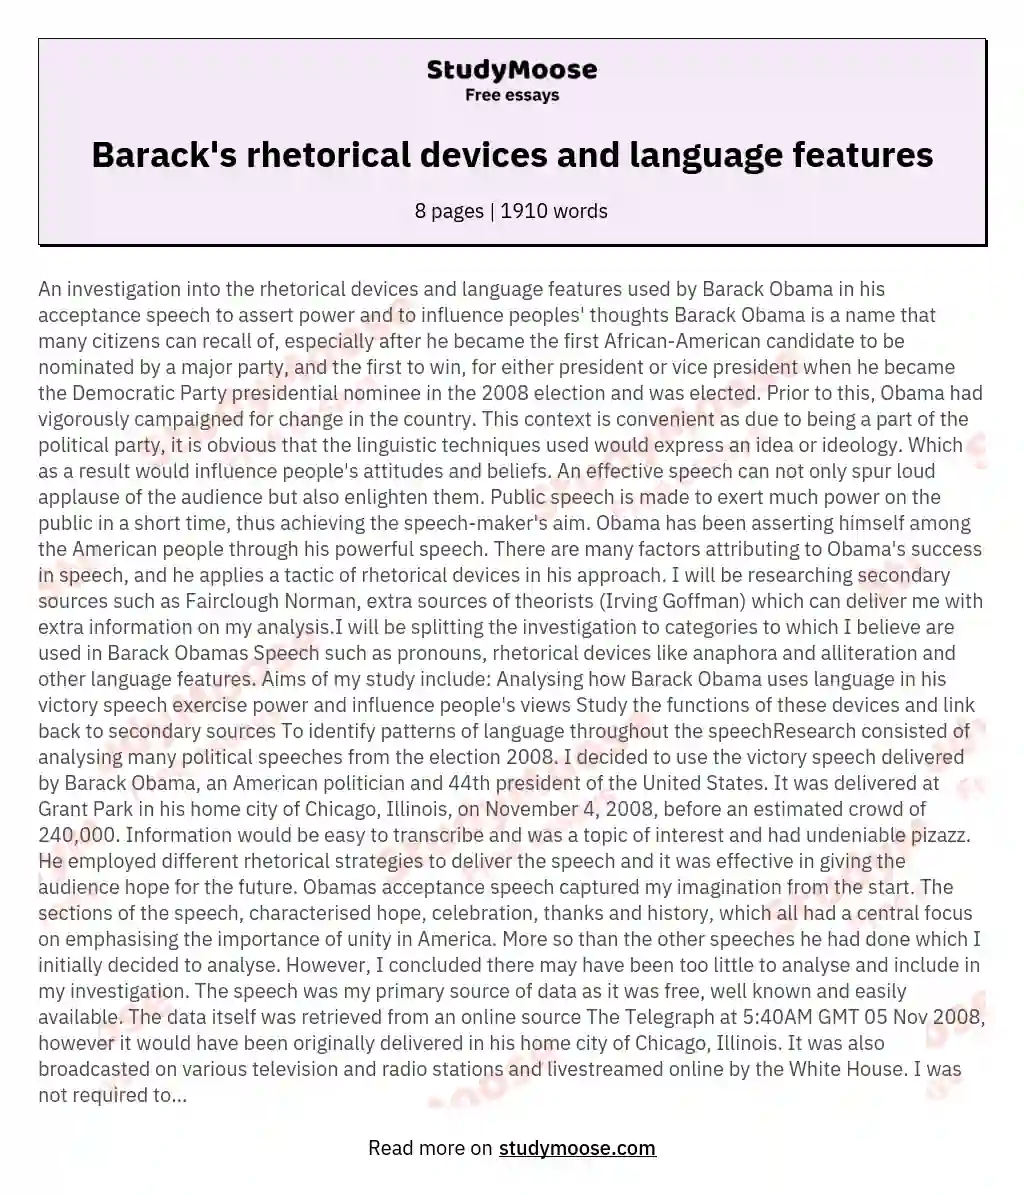 An investigation into the rhetorical devices and language features used by Barack